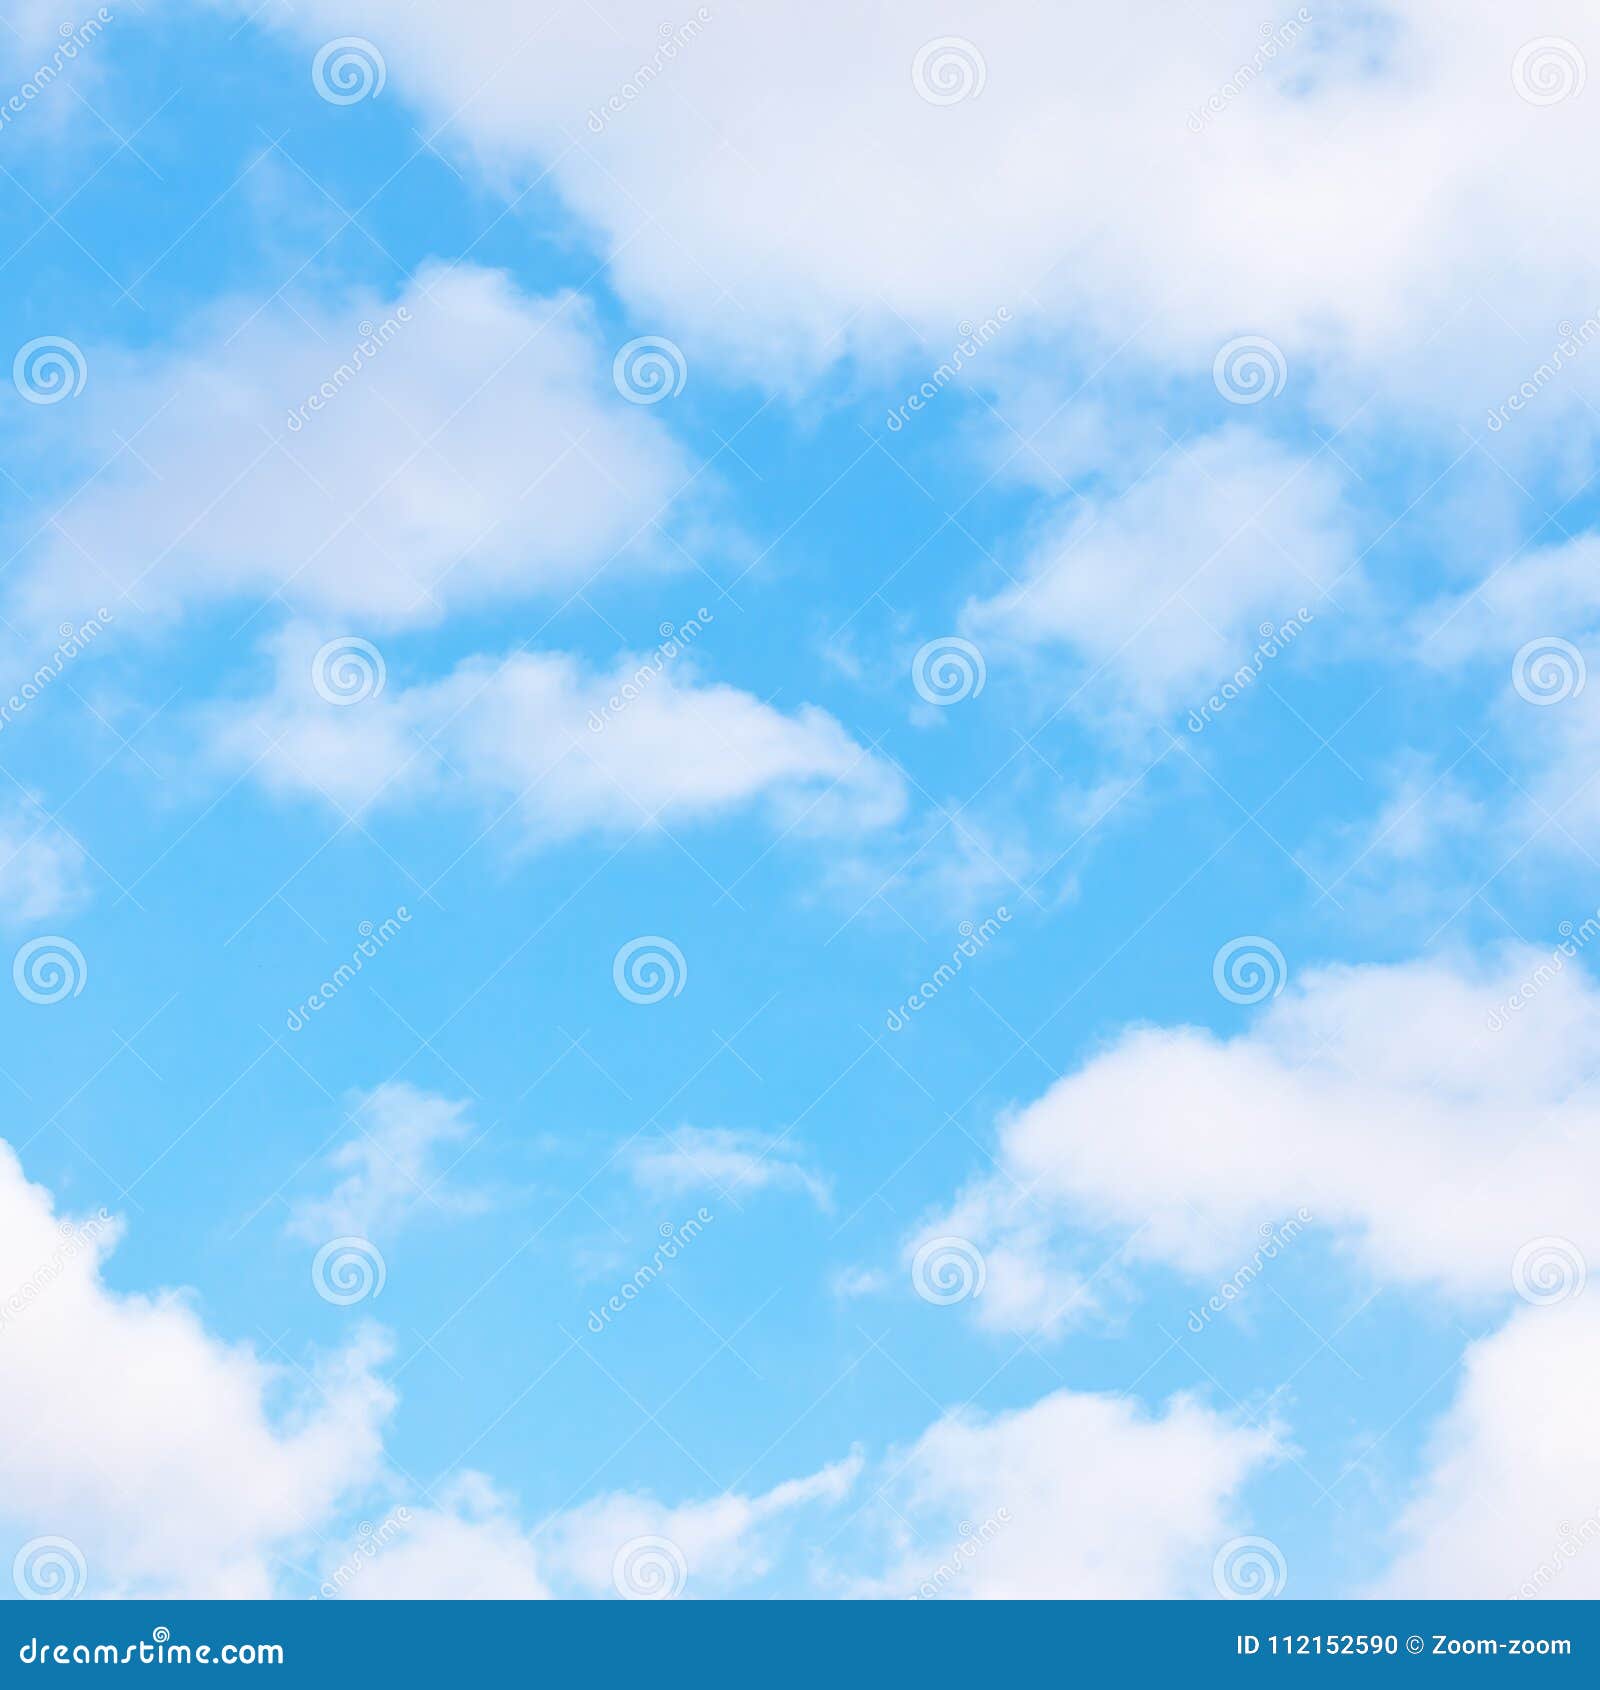 Spring Sky with Clouds - Background Stock Photo - Image of clouds ...